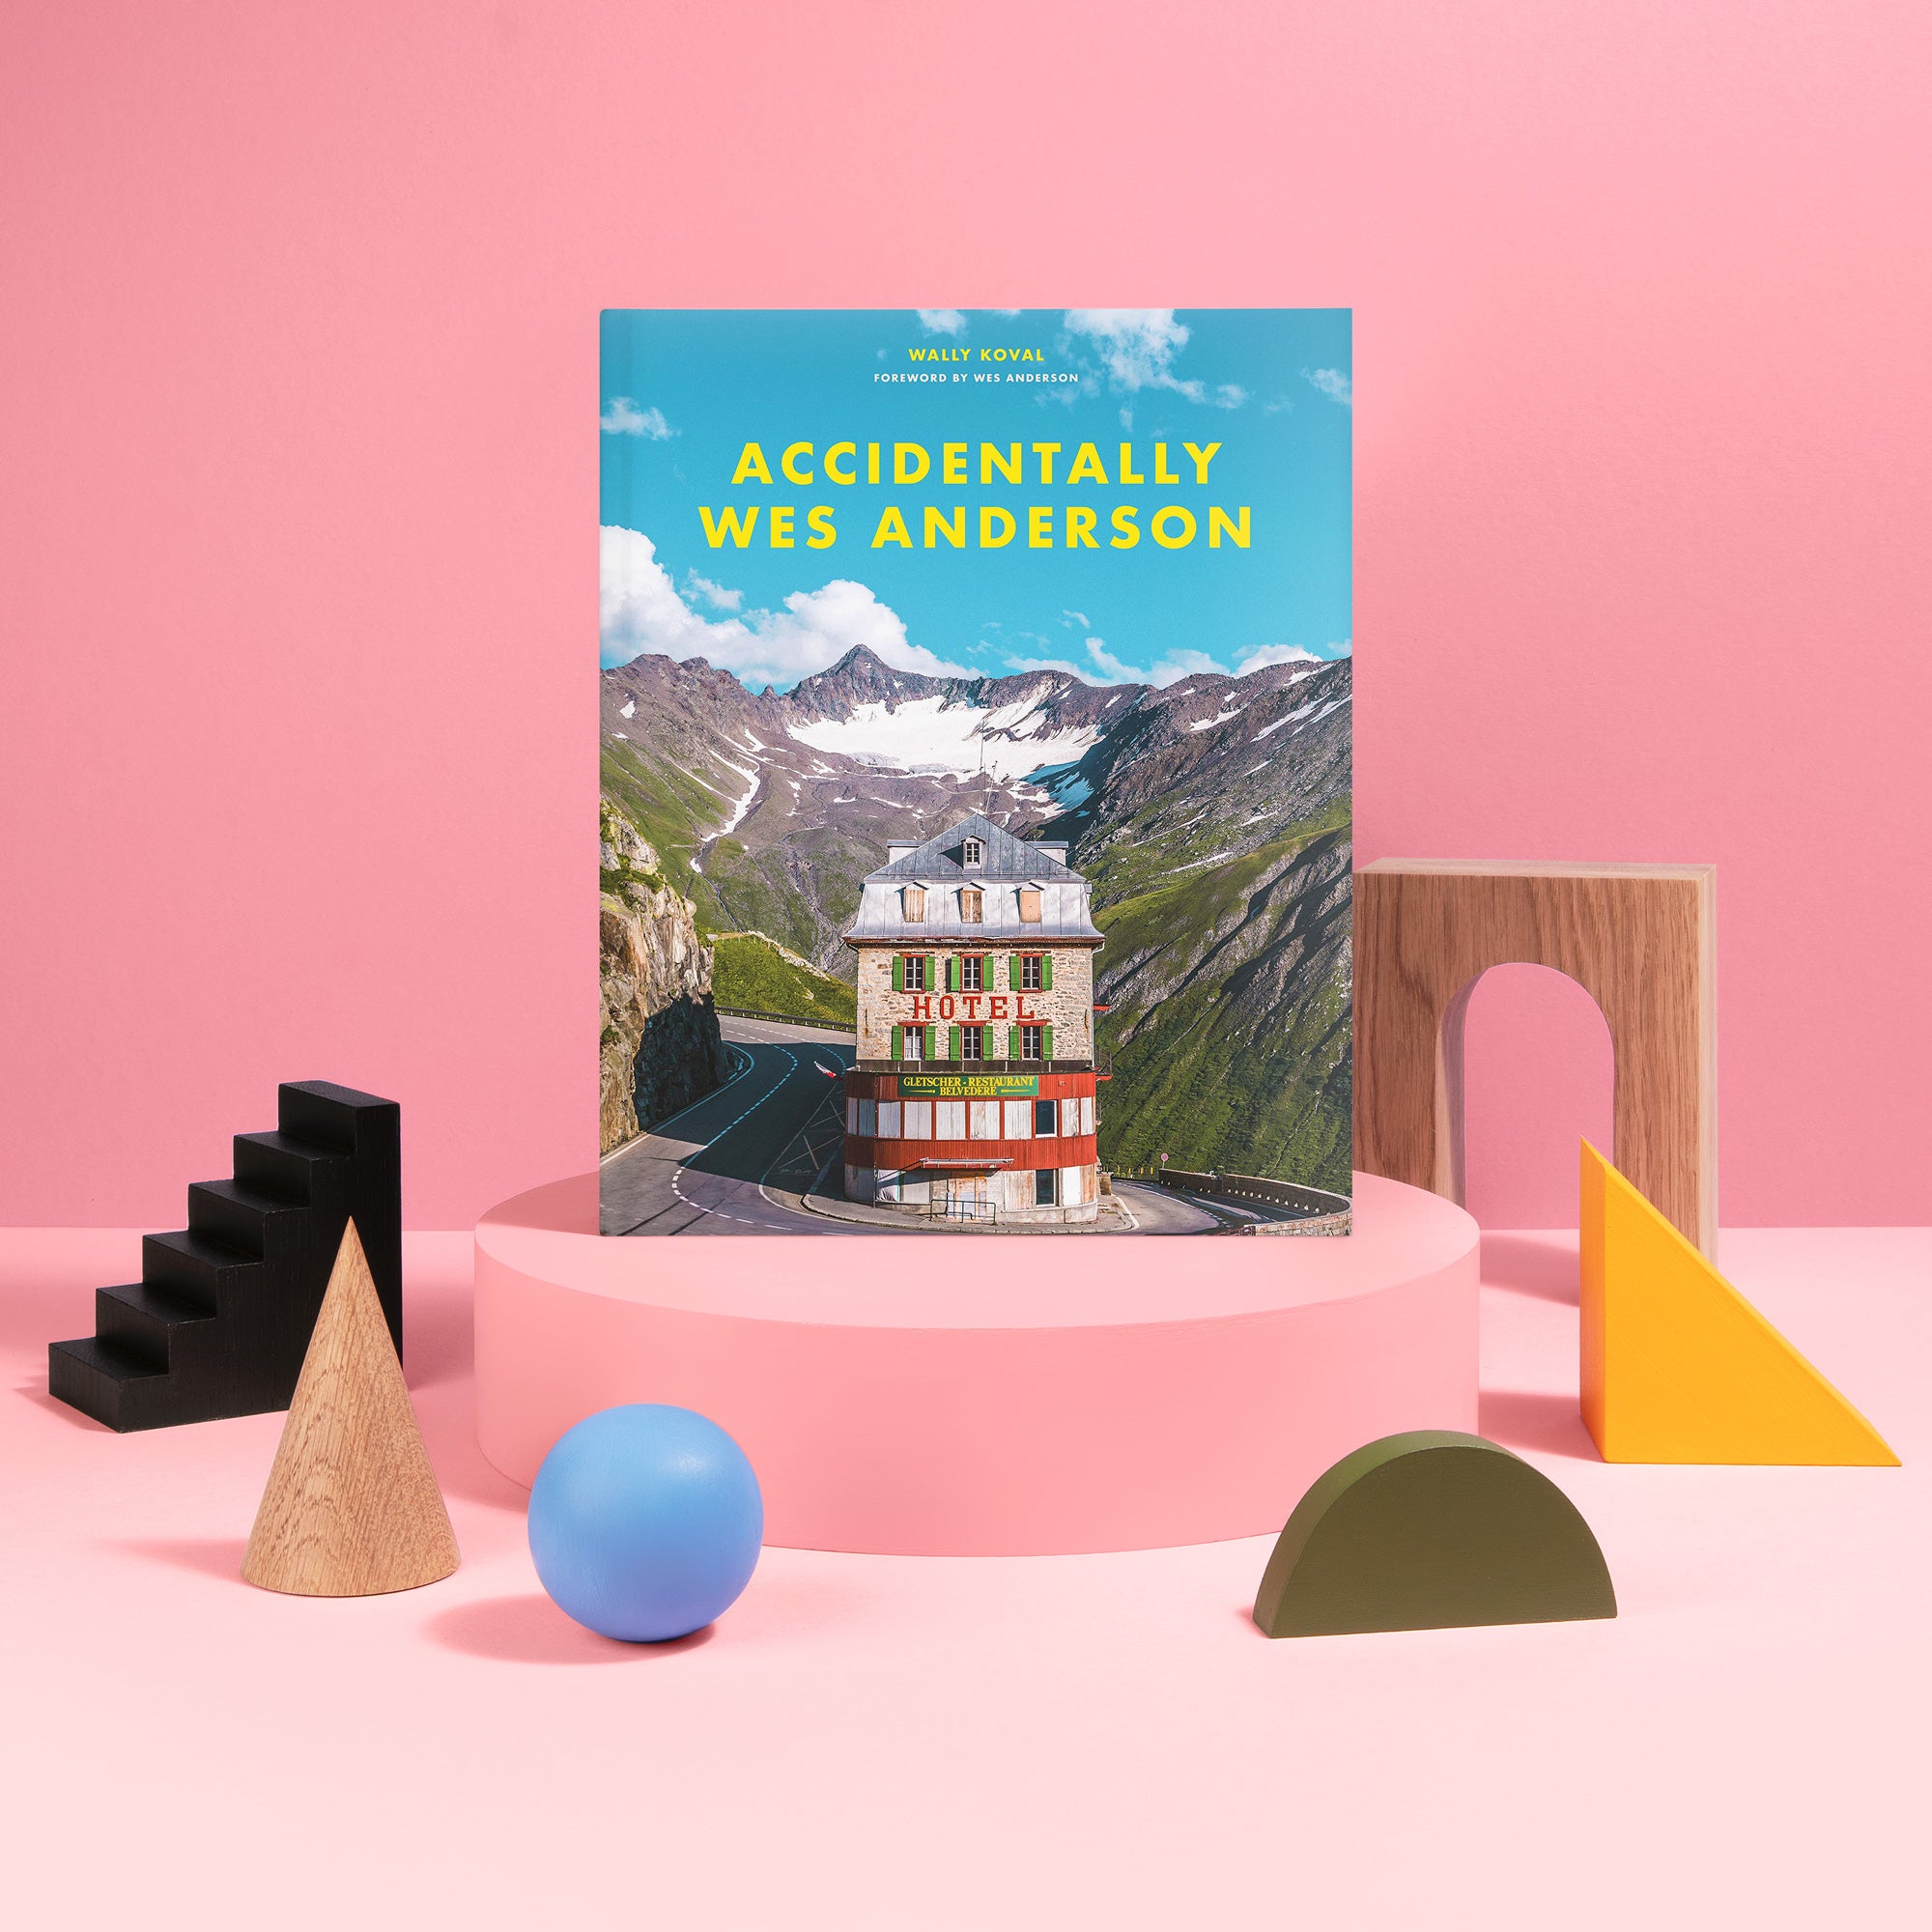 Accidentally Wes Anderson | Book | by Wally Koval - Lifestory - Bookspeed